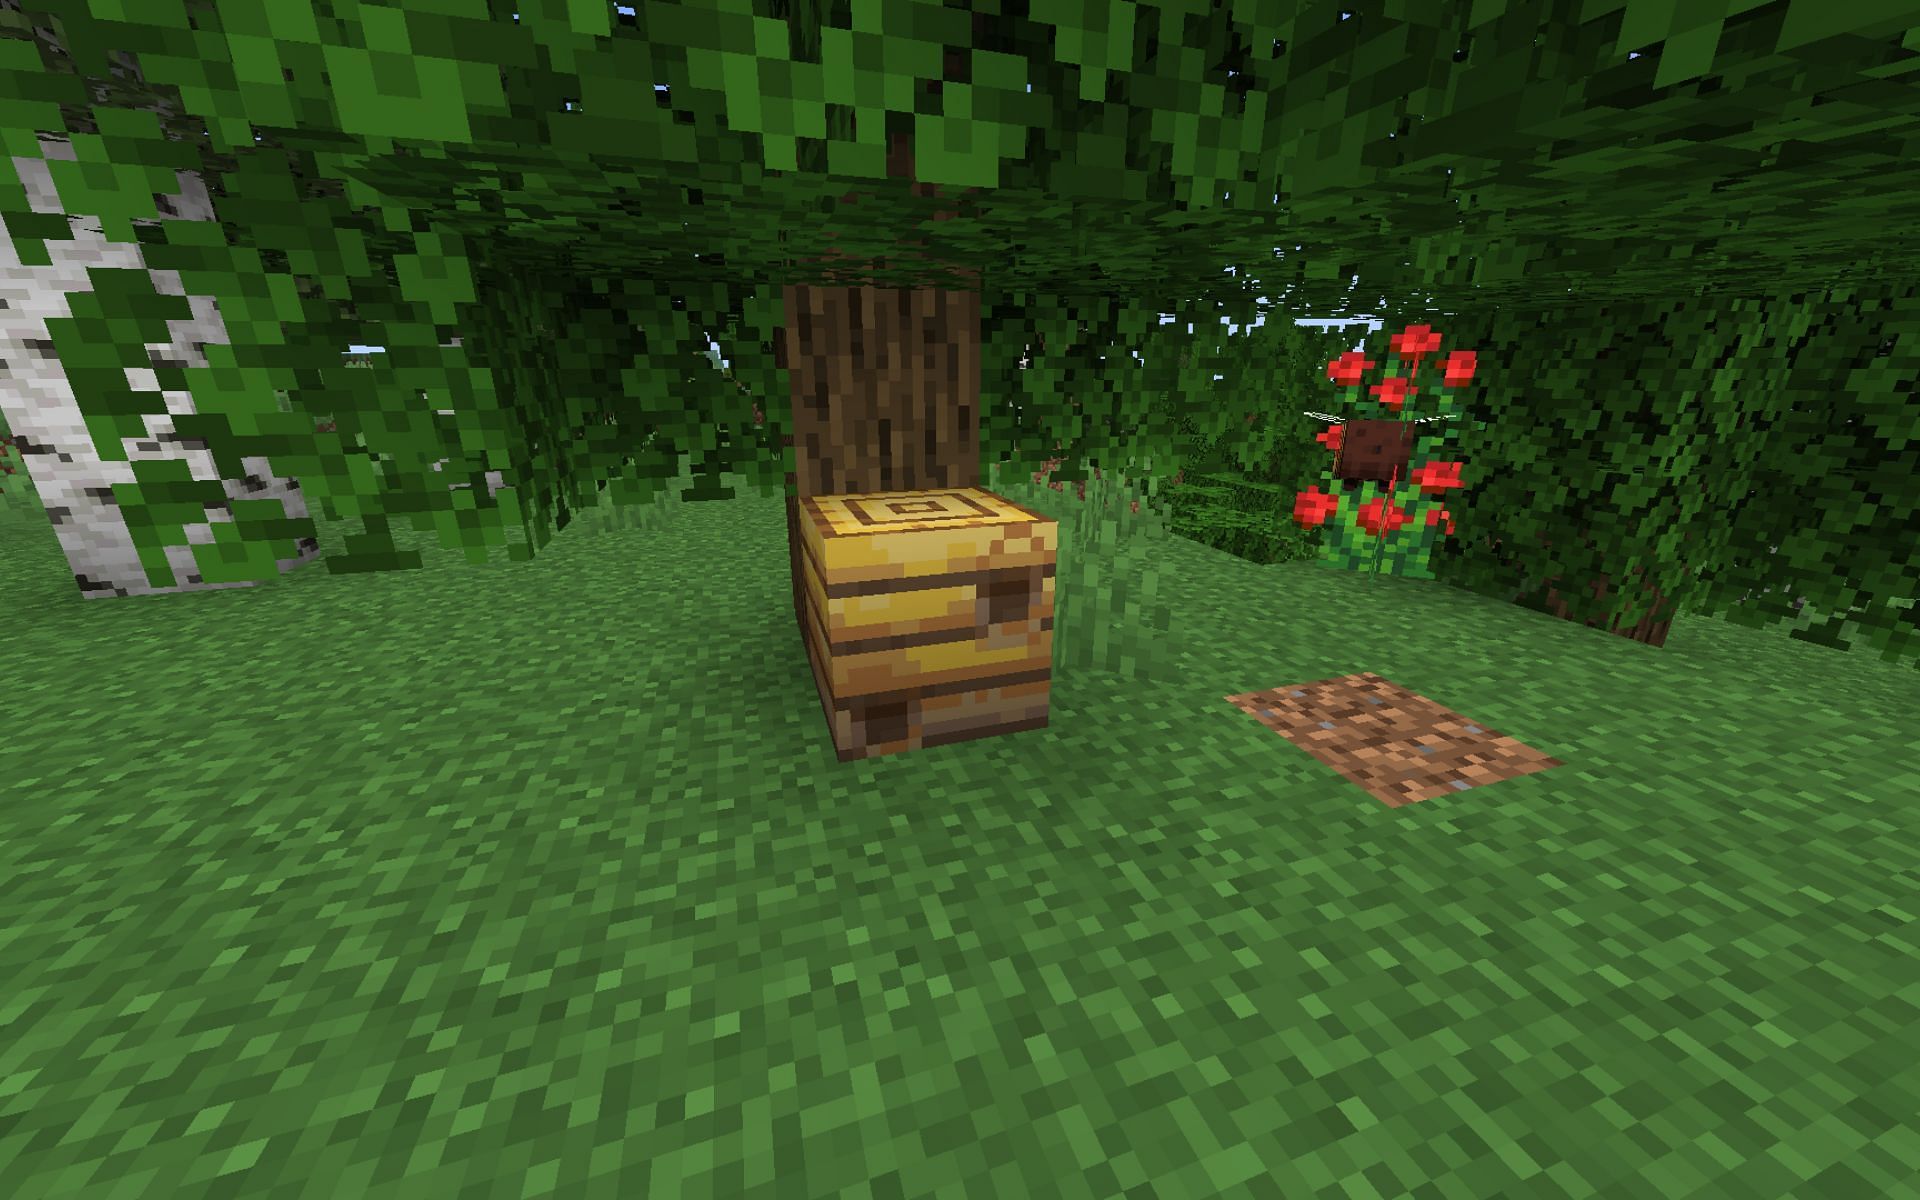 Players must first find a bee nest and get enough honeycomb (Image via Minecraft 1.19)